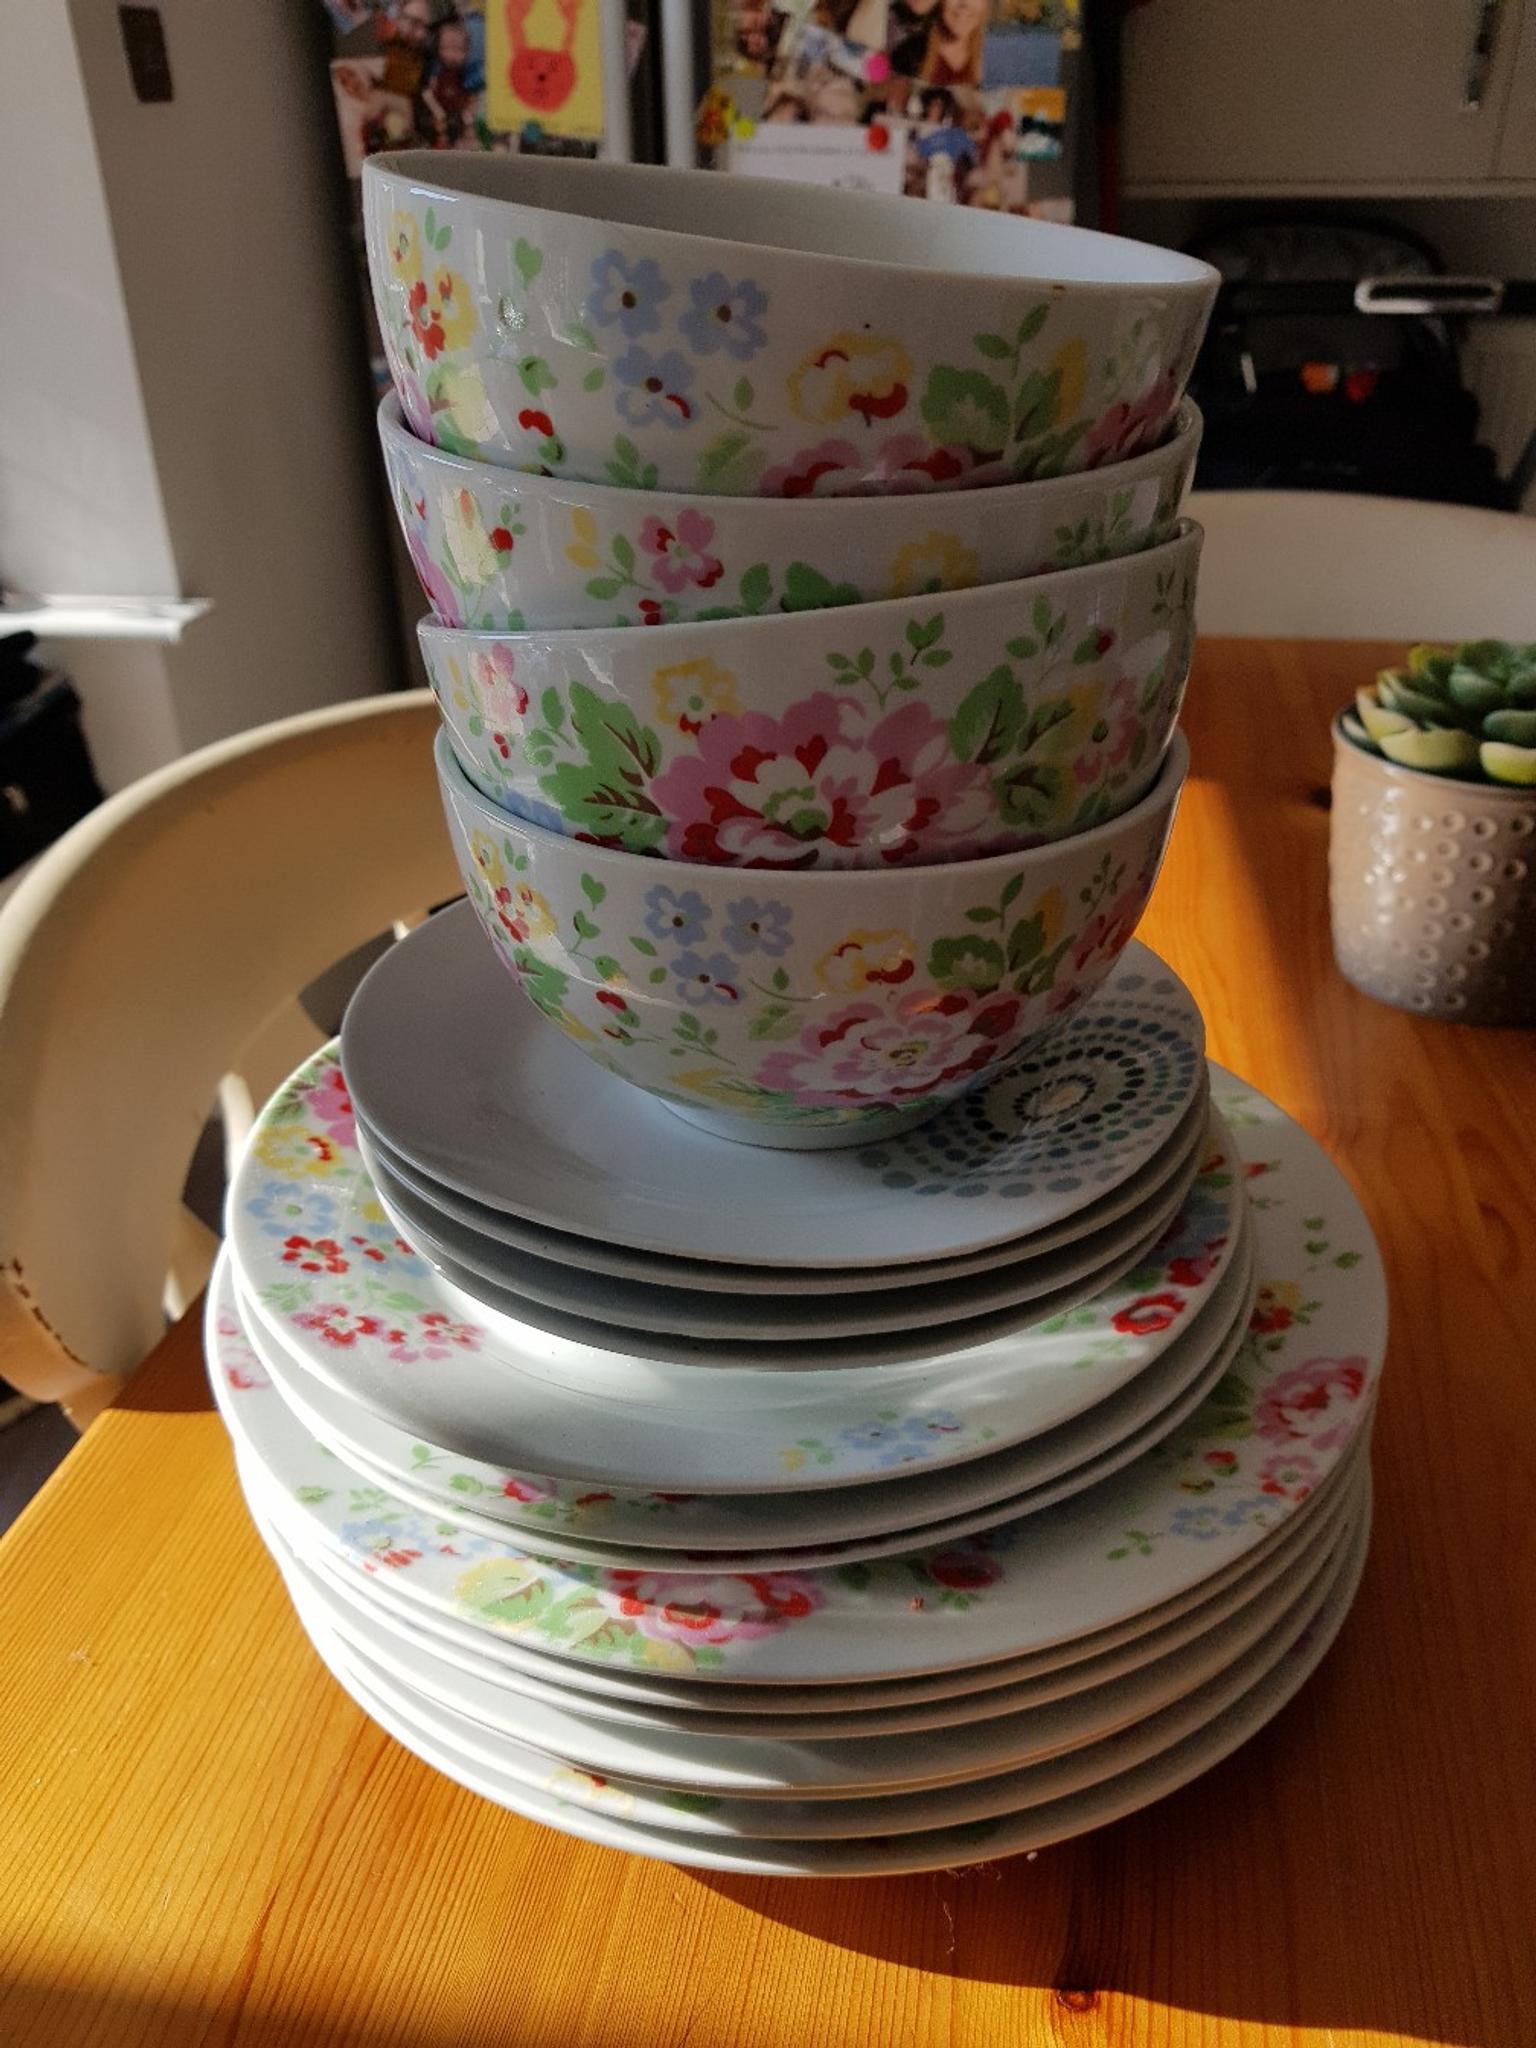 Cath Kidston plates and bowls in DN20 